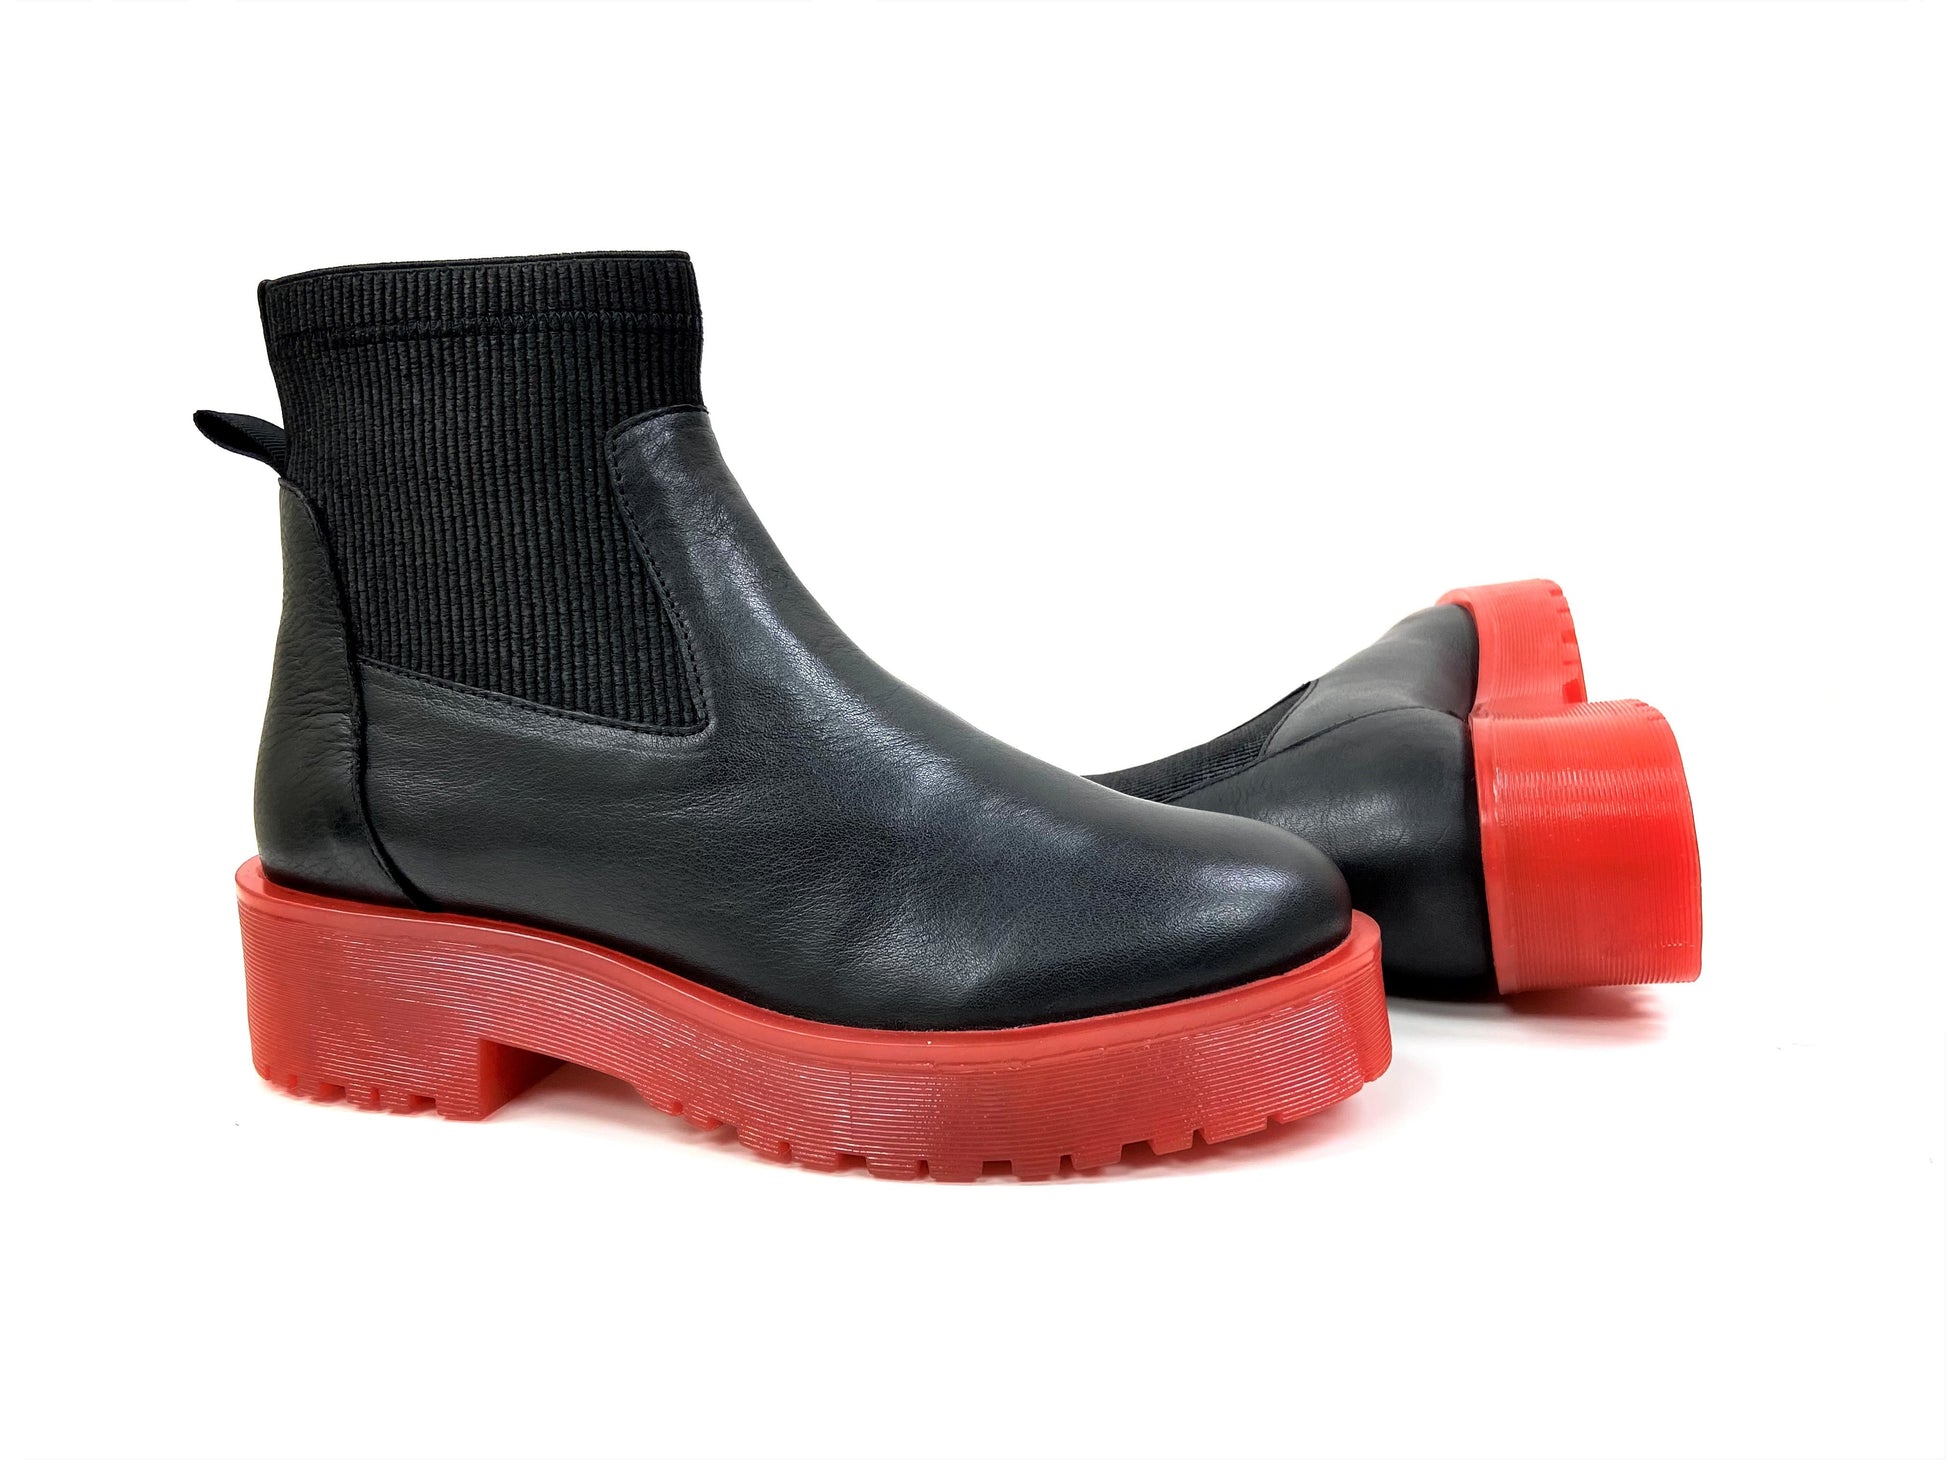 Red Sole Hevea Chelsea Boots